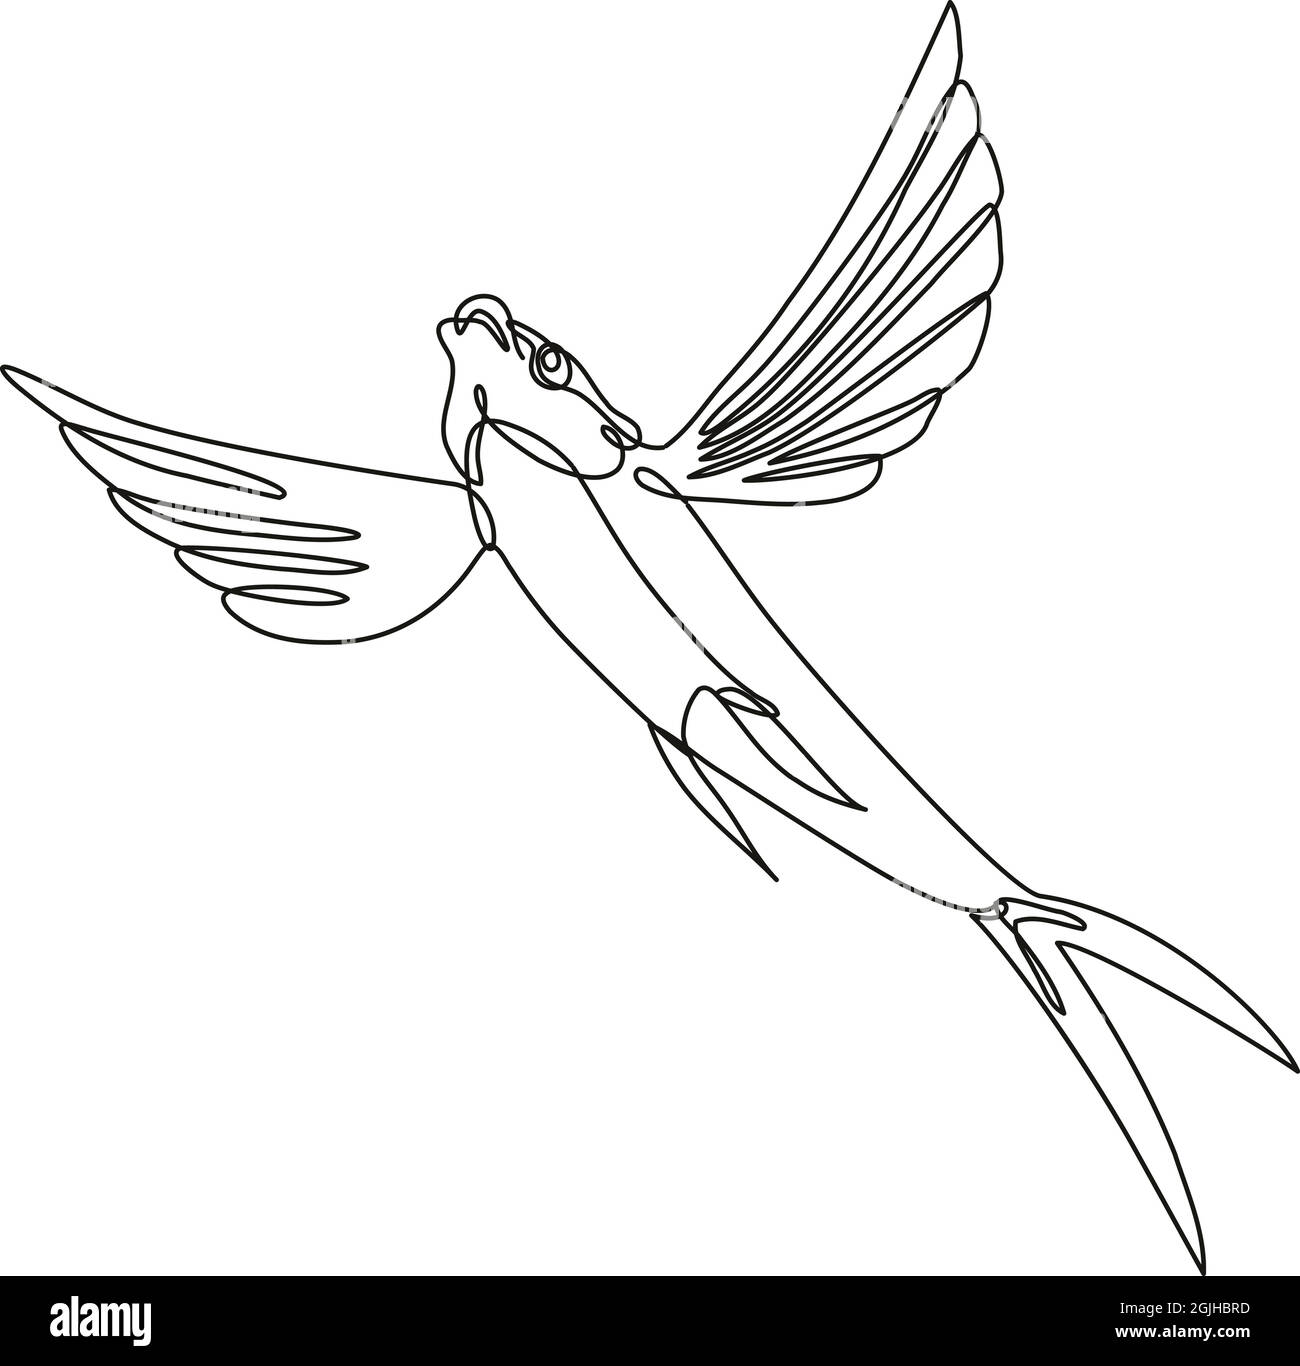 Continuous line drawing illustration of a Sailfin flying fish taking off  done in mono line or doodle style in black and white on isolated background  Stock Vector Image & Art - Alamy